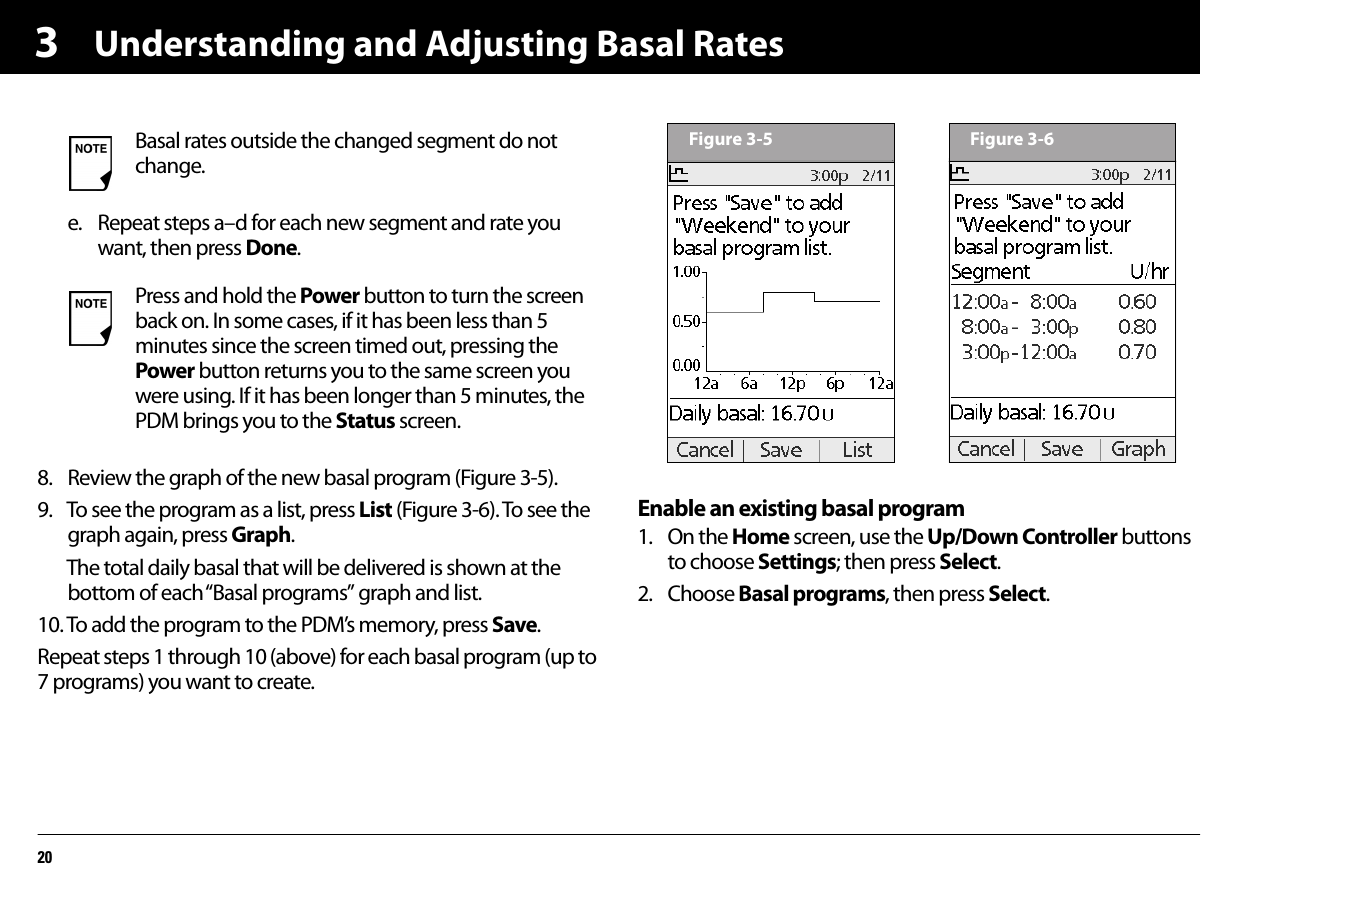 Understanding and Adjusting Basal Rates203e. Repeat steps a–d for each new segment and rate you want, then press Done.8. Review the graph of the new basal program (Figure 3-5).9. To see the program as a list, press List (Figure 3-6). To see the graph again, press Graph.The total daily basal that will be delivered is shown at the bottom of each “Basal programs” graph and list.10. To add the program to the PDM’s memory, press Save.Repeat steps 1 through 10 (above) for each basal program (up to 7 programs) you want to create.Enable an existing basal program1. On the Home screen, use the Up/Down Controller buttons to choose Settings; then press Select.2. Choose Basal programs, then press Select.Basal rates outside the changed segment do not change.Press and hold the Power button to turn the screen back on. In some cases, if it has been less than 5 minutes since the screen timed out, pressing the Power button returns you to the same screen you were using. If it has been longer than 5 minutes, the PDM brings you to the Status screen.Figure 3-5 Figure 3-6